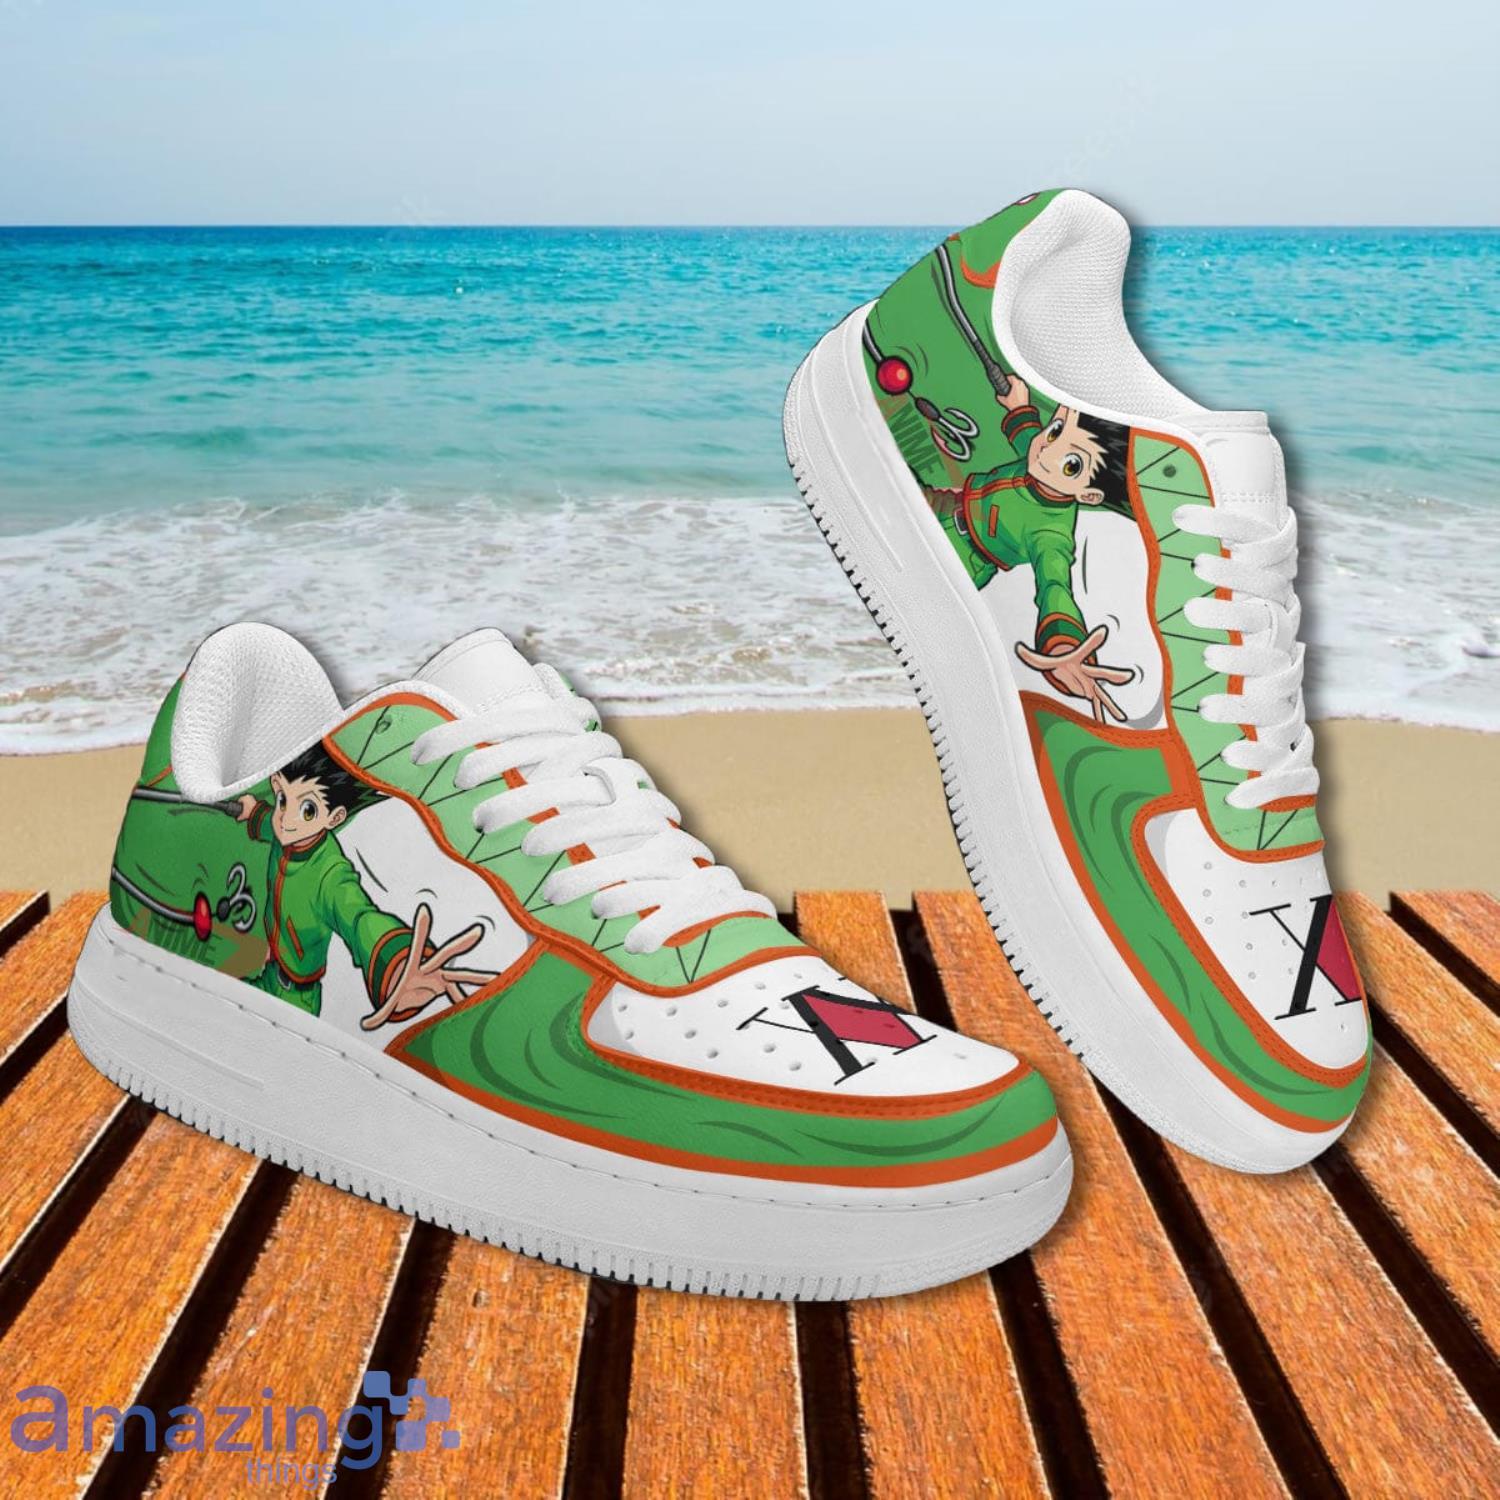 Nike Air Force 1 Custom Christmas XMAS Special Shoes Green Red